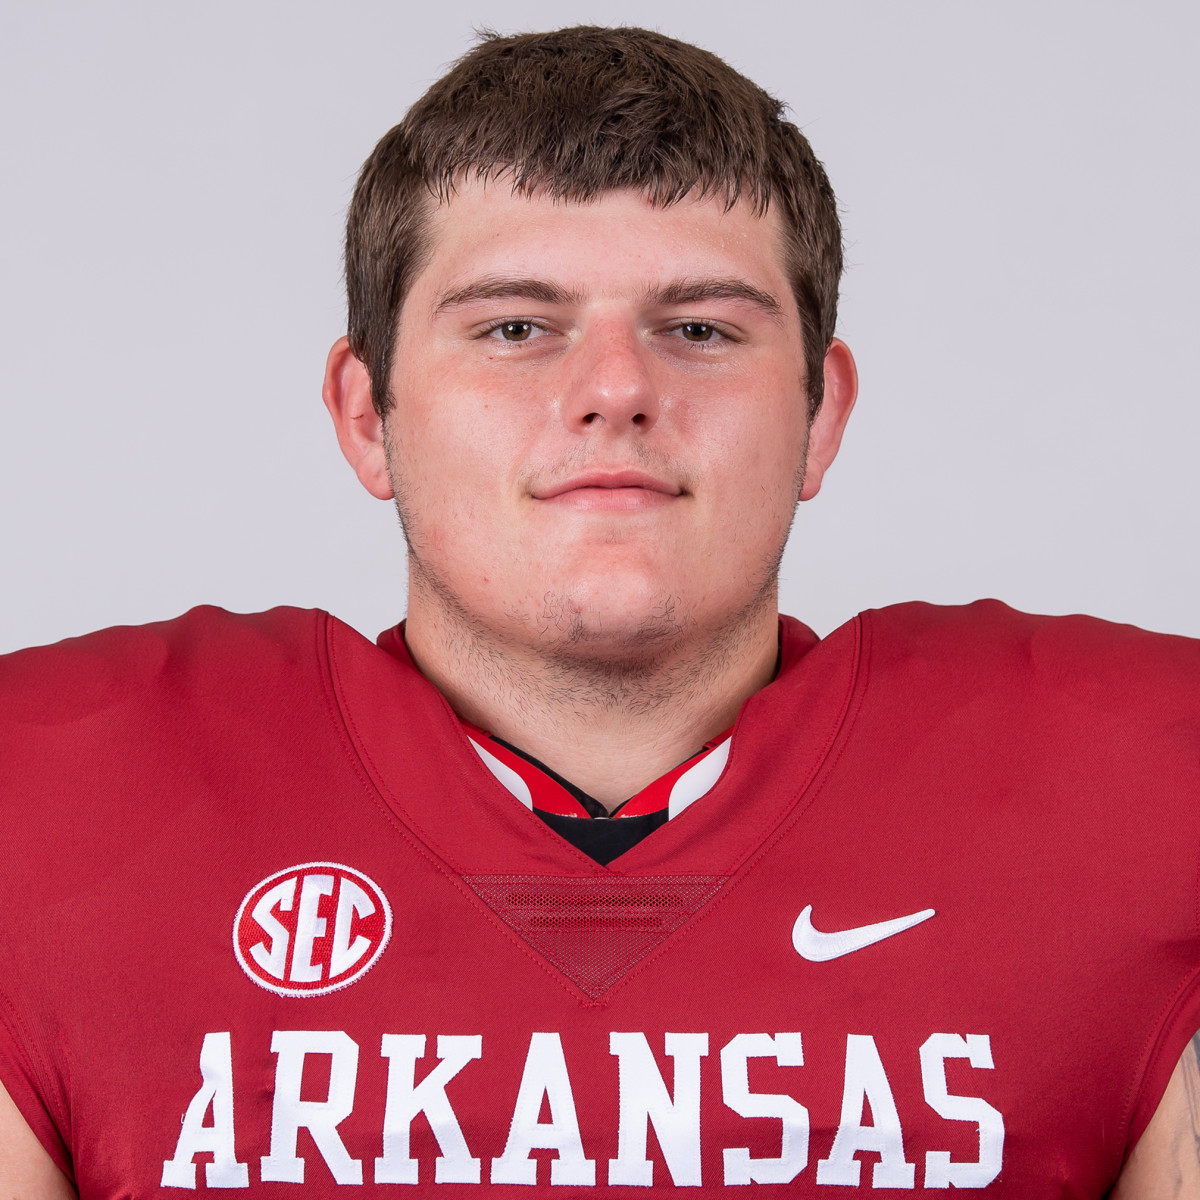 NFL Draft Profile: John Ridgeway III, Defensive Lineman, Arkansas  Razorbacks - Visit NFL Draft on Sports Illustrated, the latest news  coverage, with rankings for NFL Draft prospects, College Football, Dynasty  and Devy